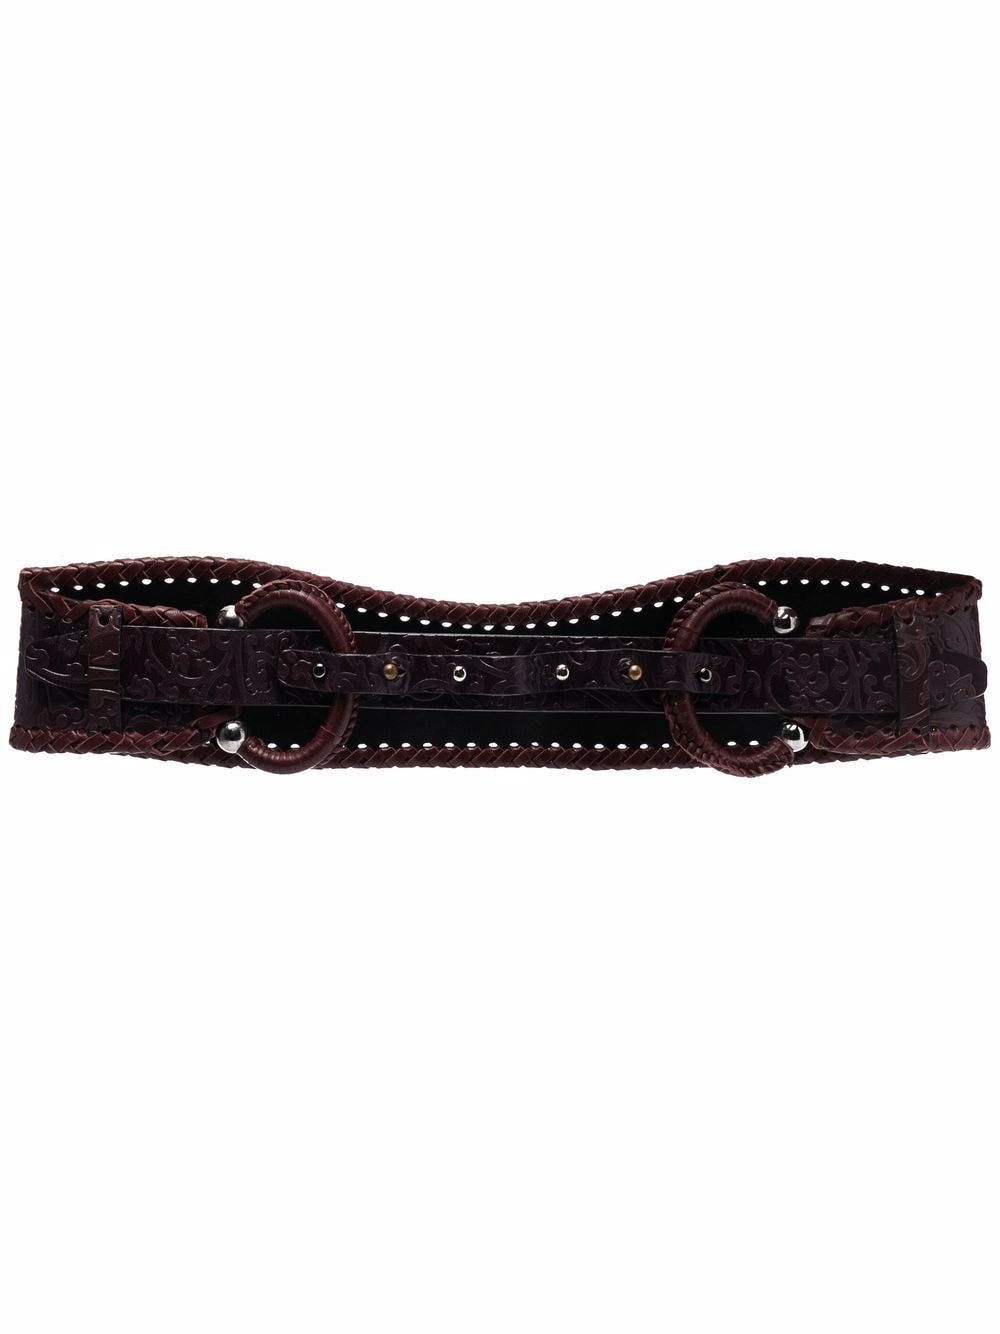 Gianfranco Ferré Pre-Owned 1990s double-buckled curved leather belt - Purple von Gianfranco Ferré Pre-Owned